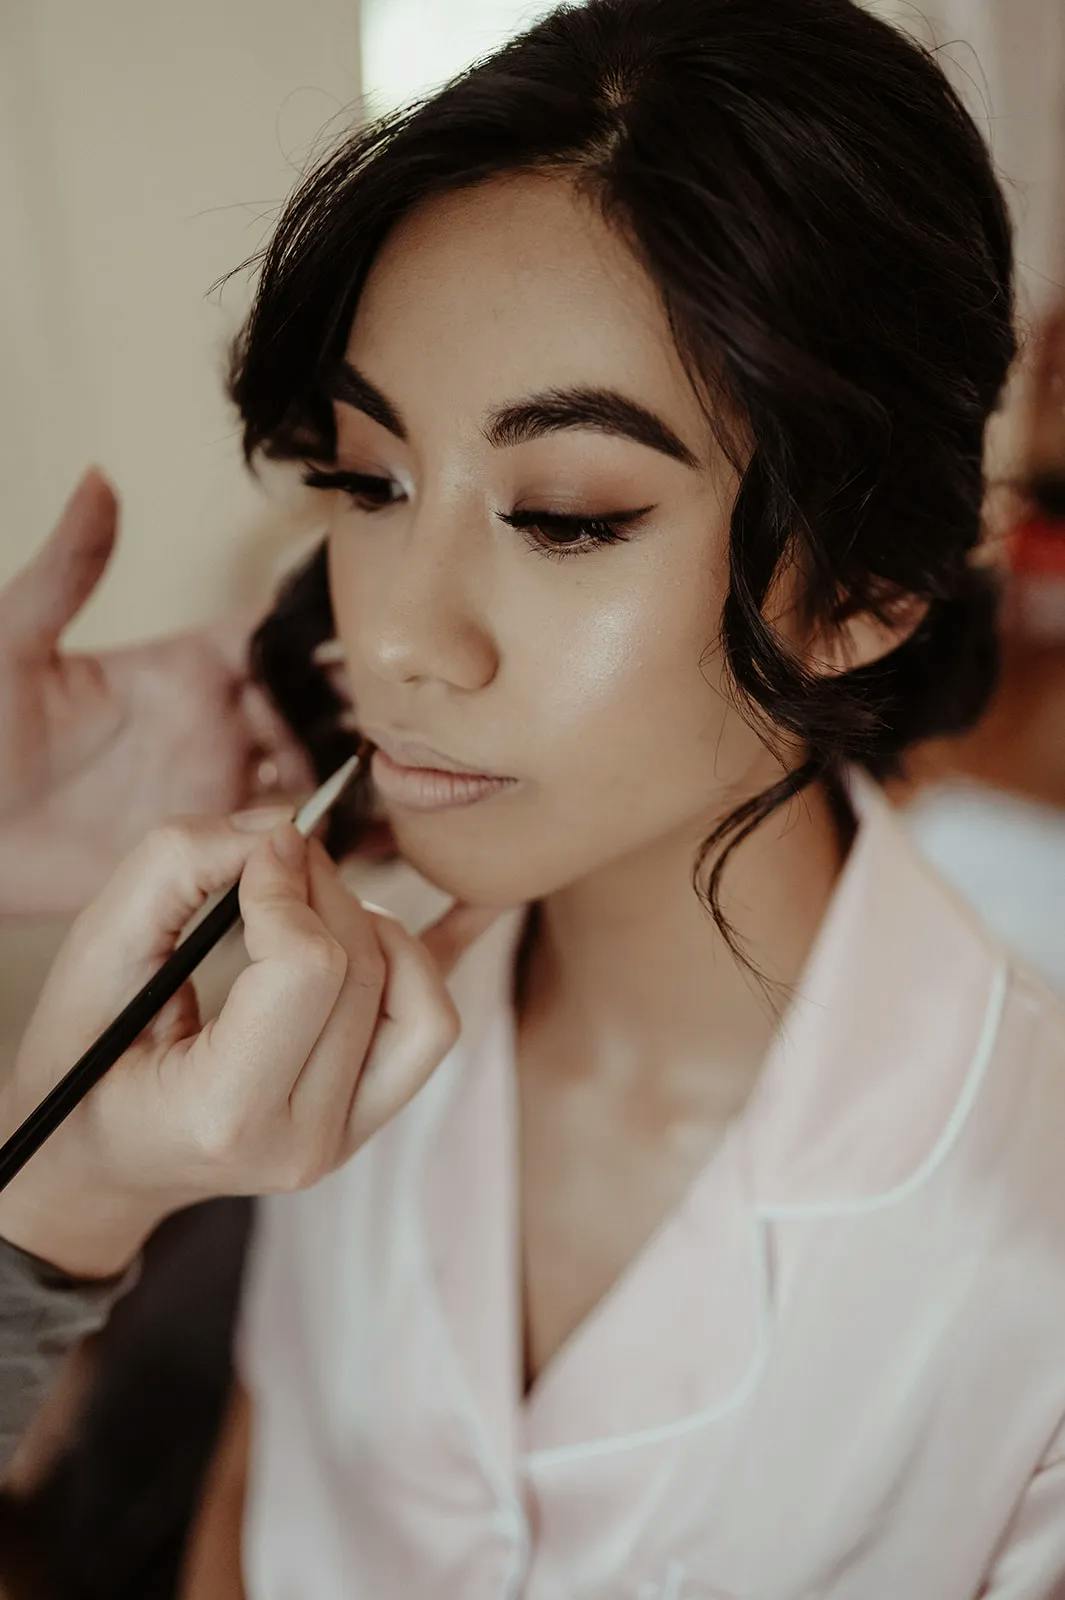 A woman with dark hair is getting her makeup done by another person. She is wearing a light pink top and her hair is styled in loose curls. The makeup artist is applying lipstick with a brush. The woman's eyes are closed and she appears calm.